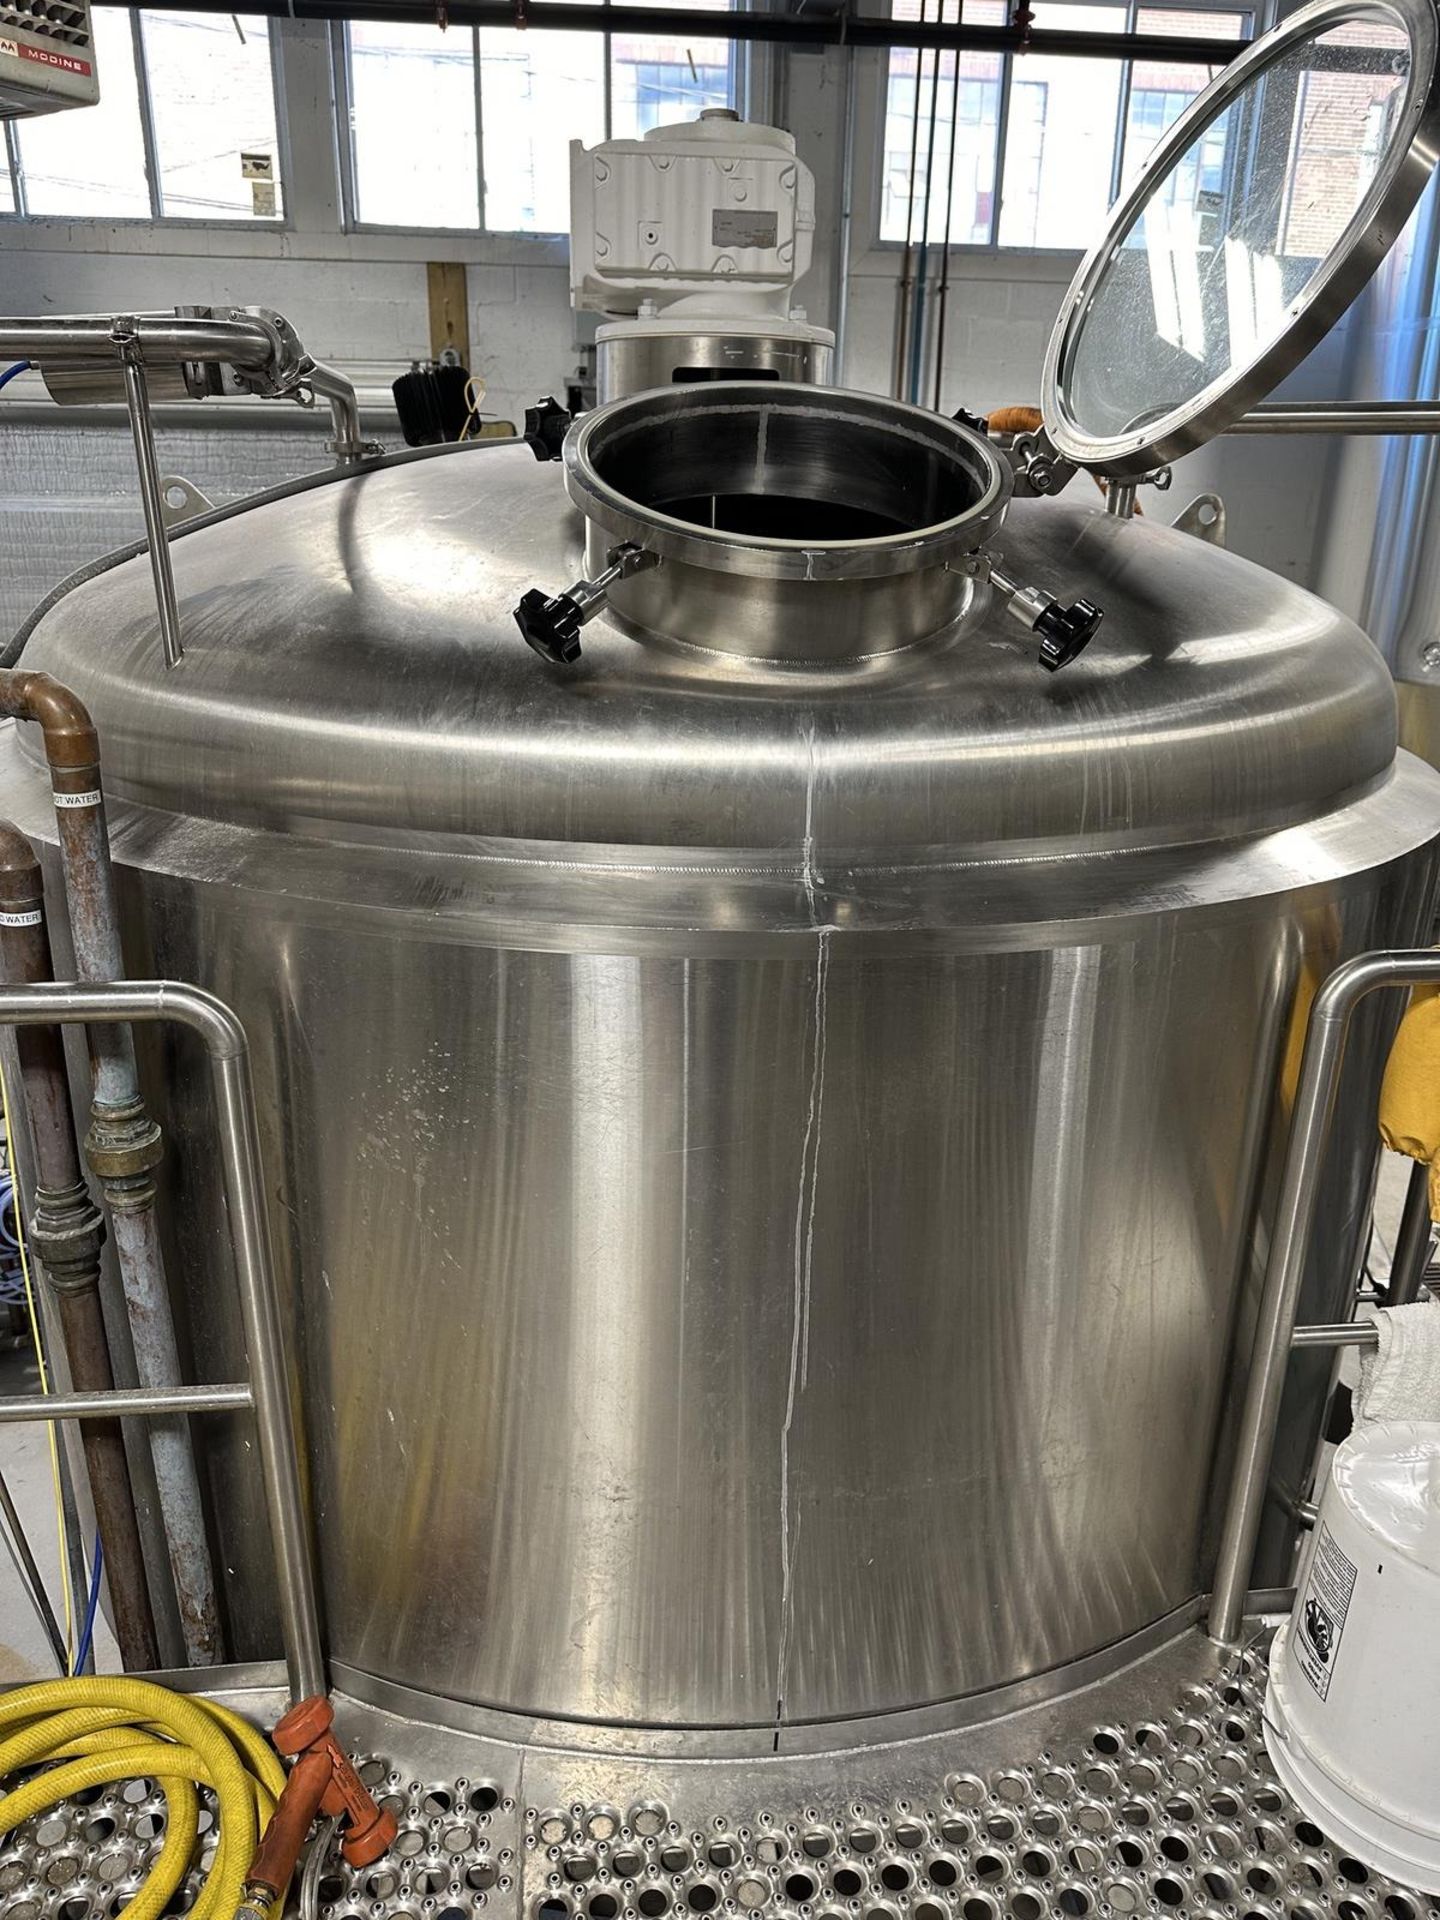 2016 ABE 30 BBL 4-Vessel Brewhouse - Brew Kettle, Mash Tun, Lauter Tun &amp; Whirlp | Rig Fee $12500 - Image 6 of 11